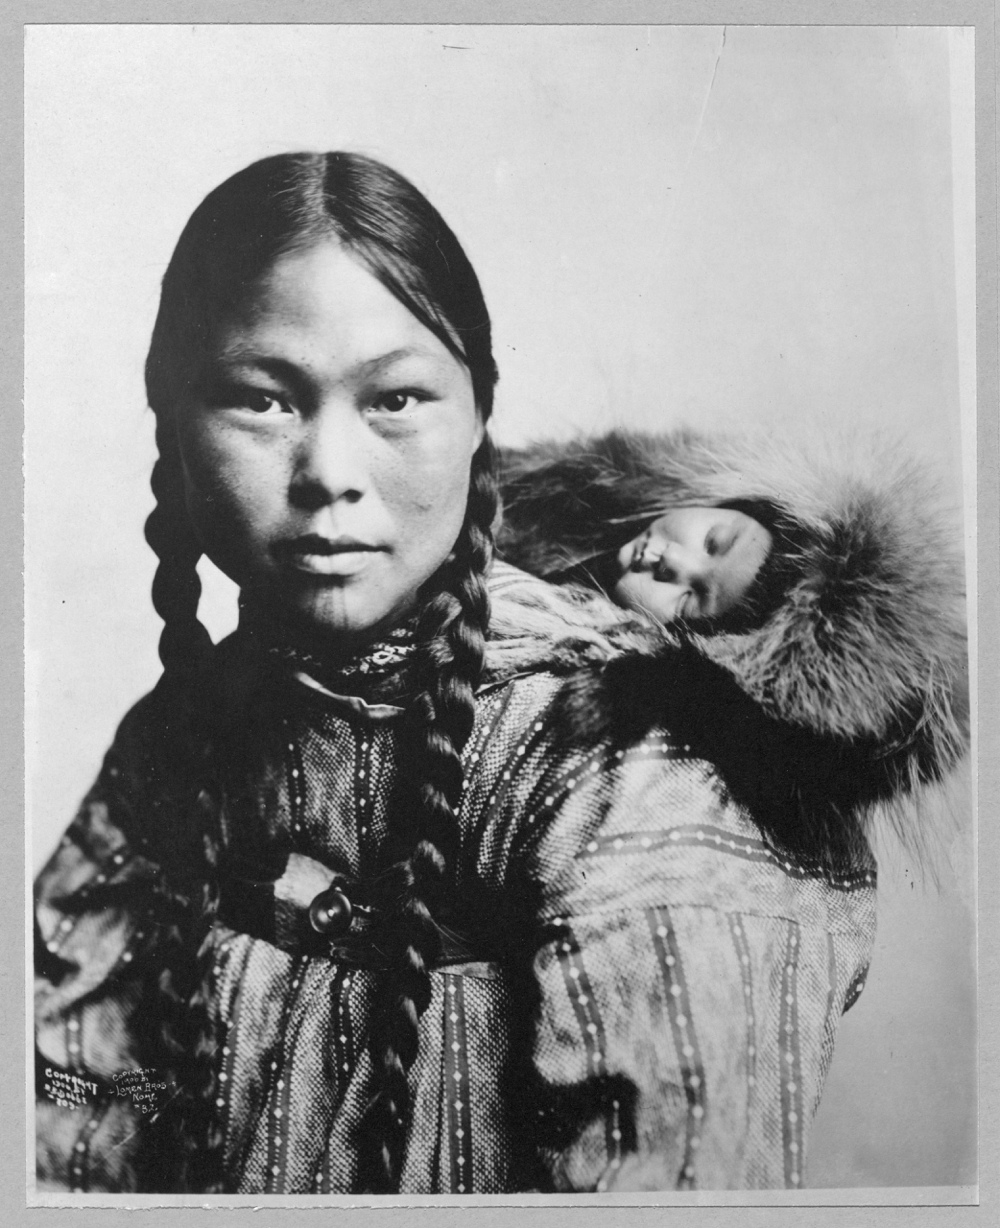 Eskimo mother with child on back